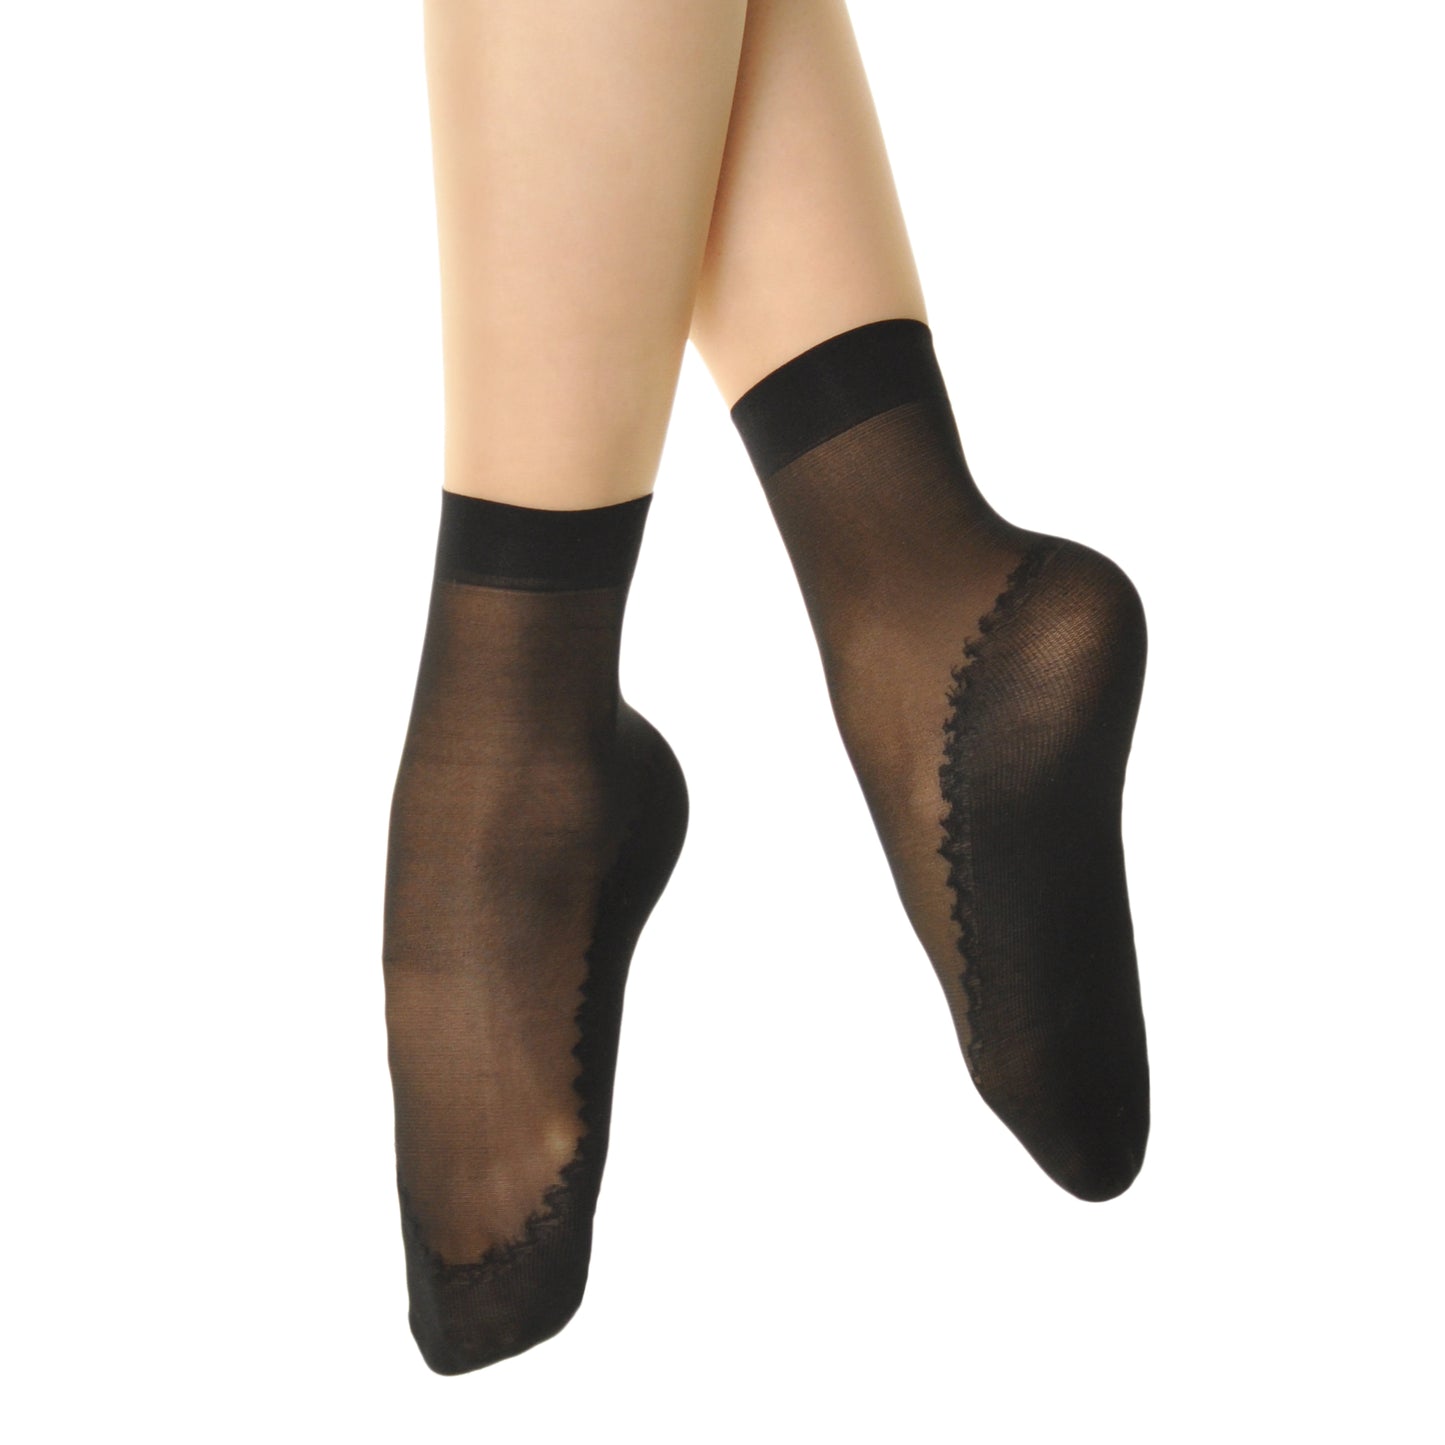 Angelina Sheer Ankle Hosiery with Reinforced Bottom (6-Pairs), #322